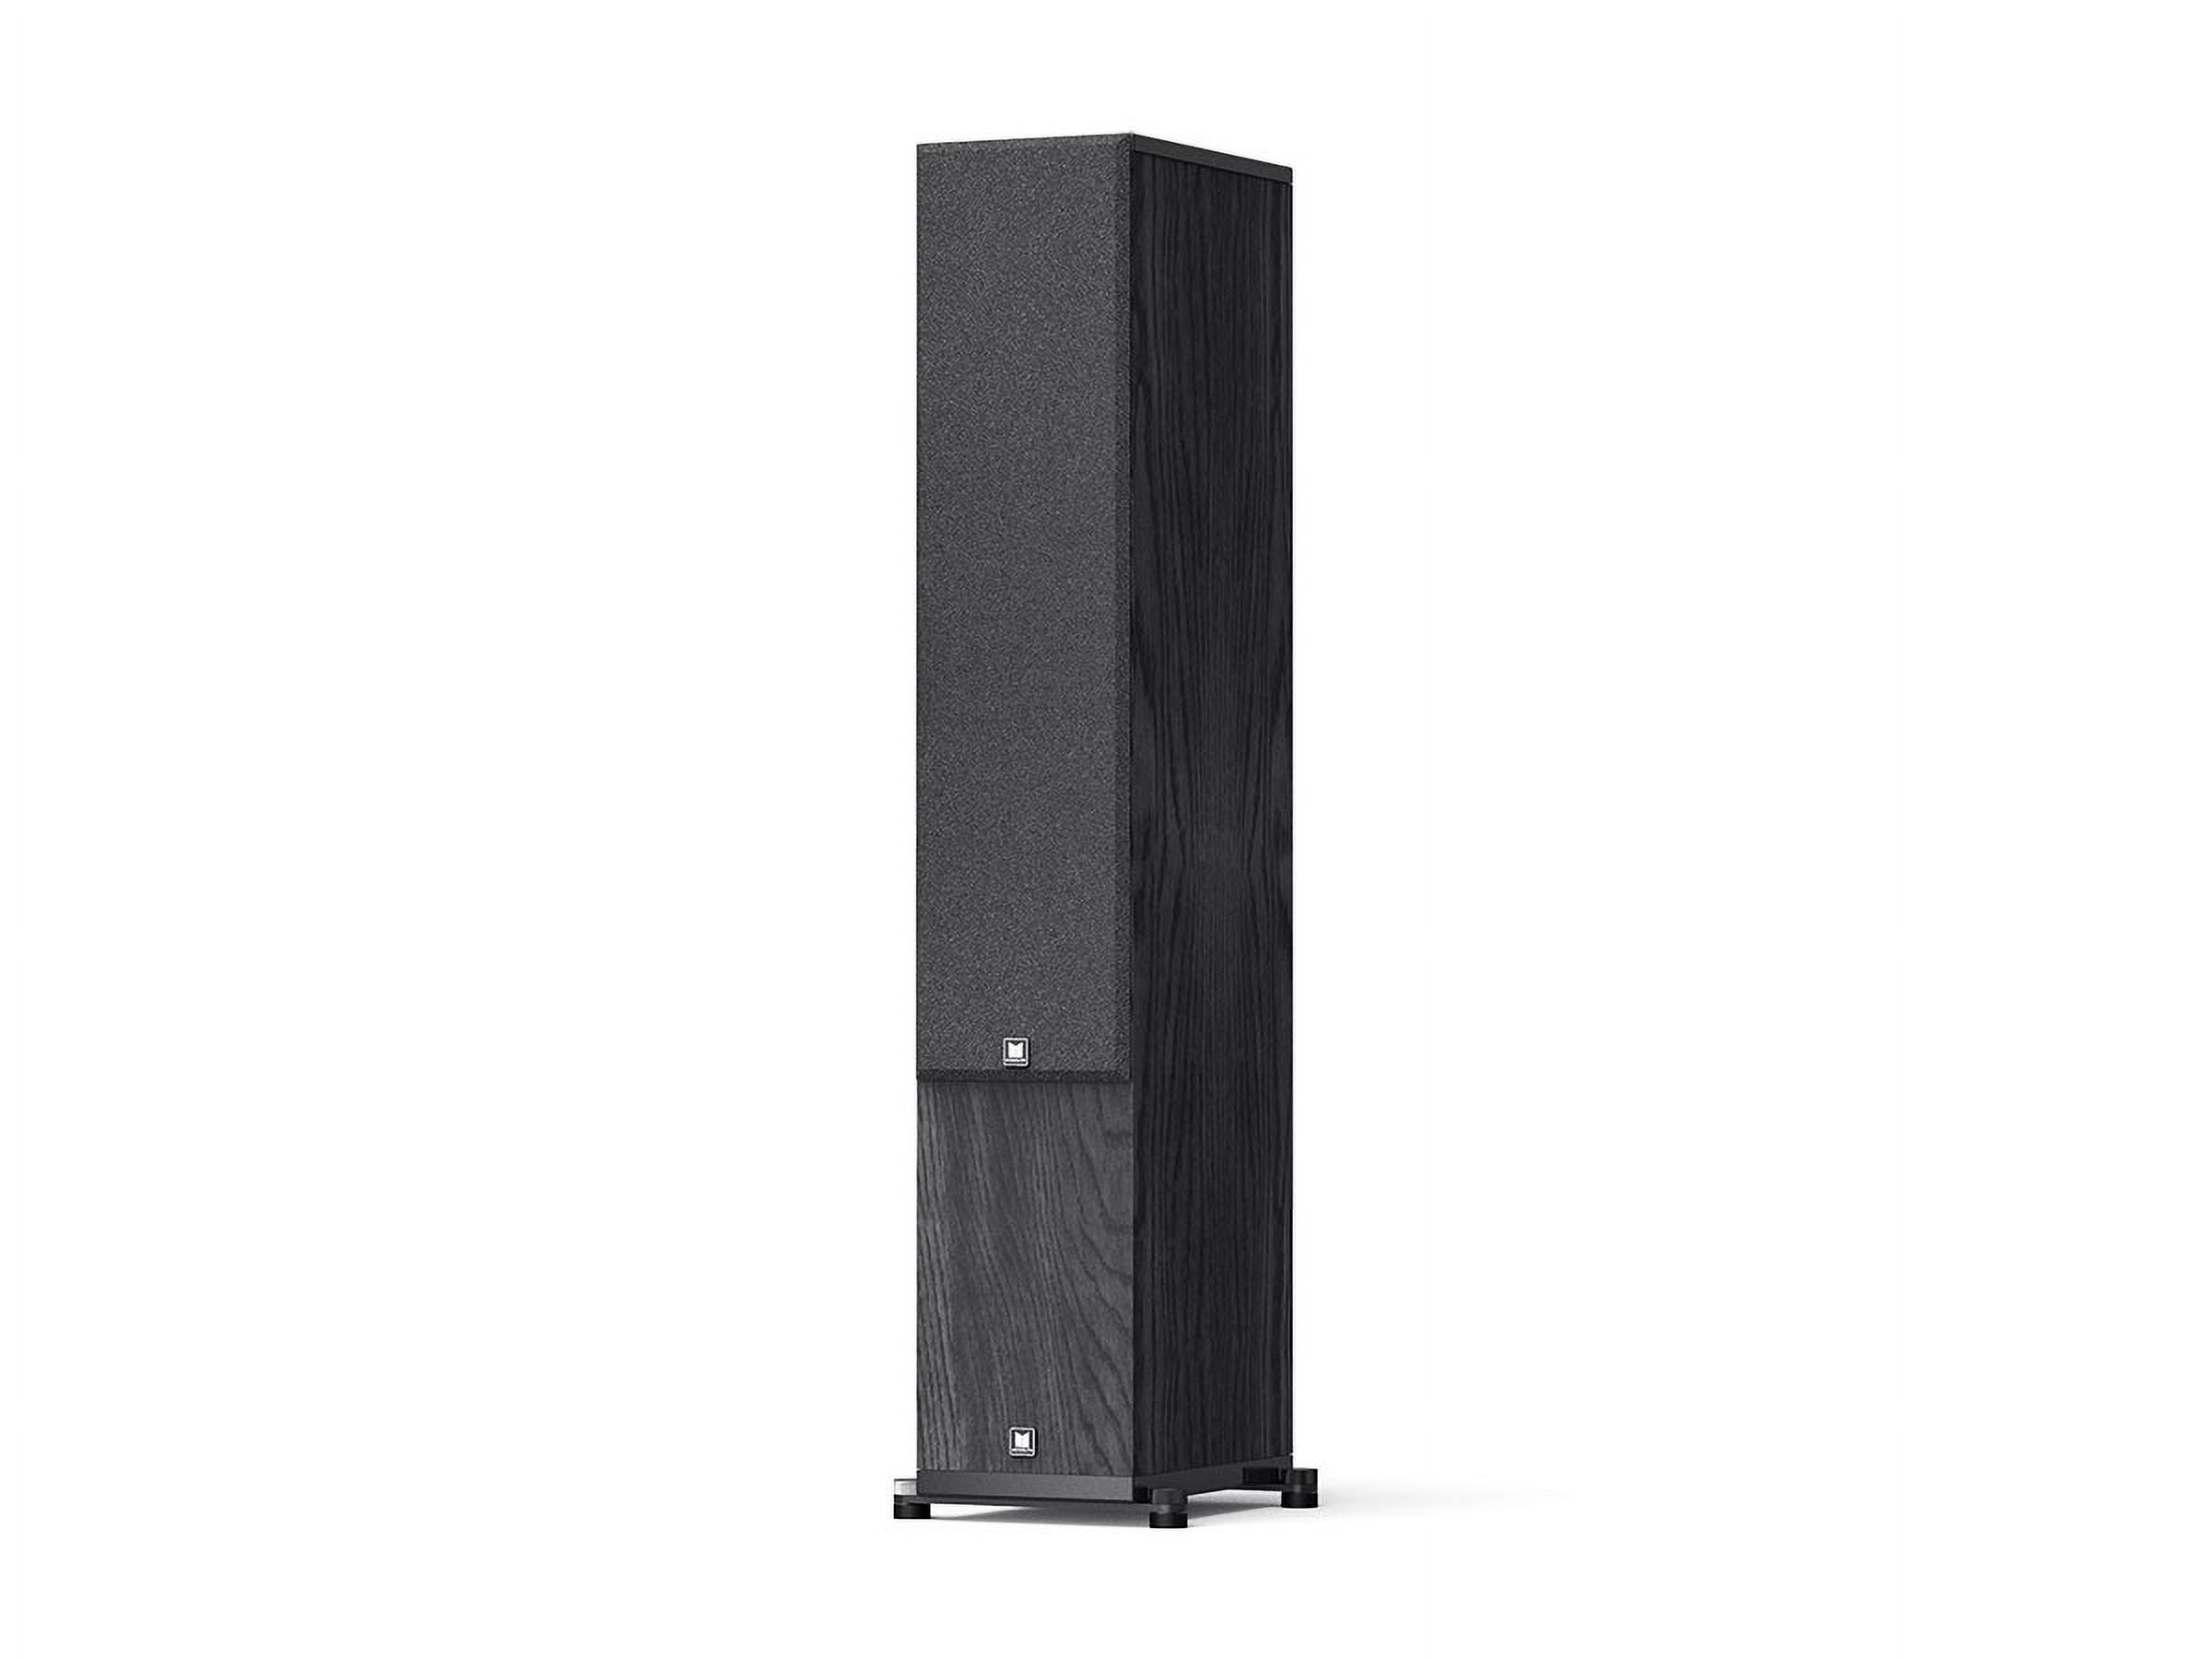 Monoprice Monolith Encore T5 Tower Speaker, High Performance Audio, 5.25 inch Main and Mid Woofers, MDF Cabinet With Internal Bracing, For Home Theater System - image 2 of 6